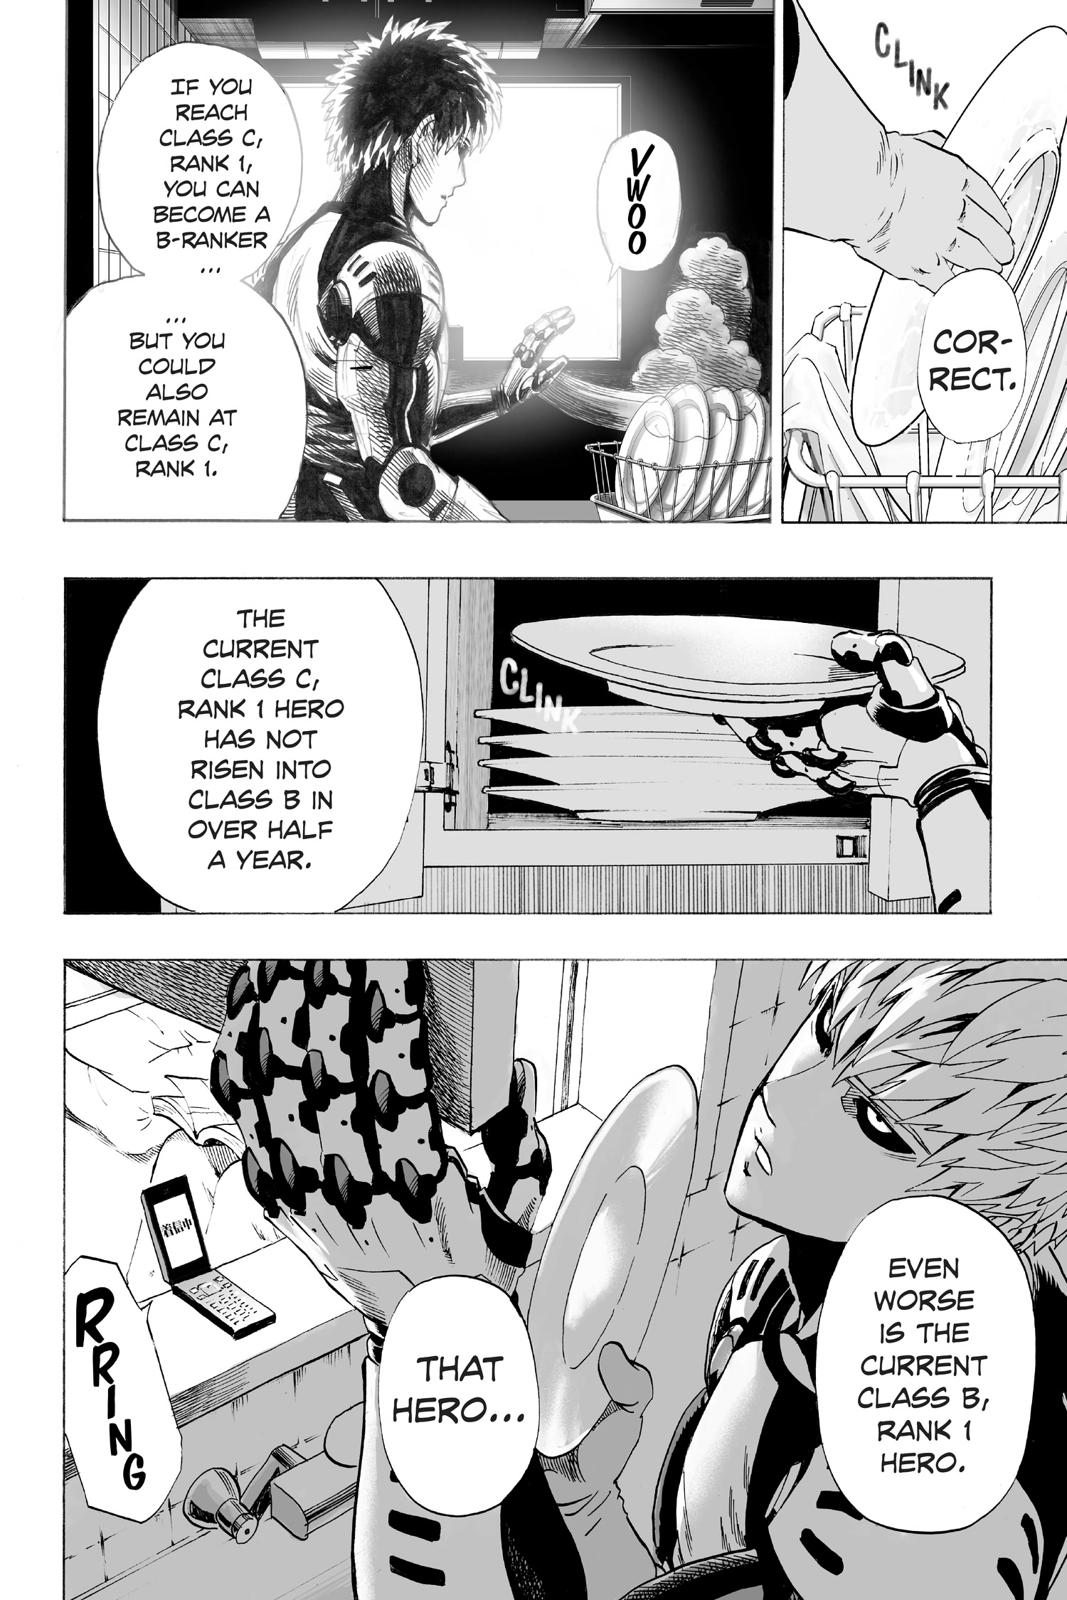 One-Punch Man, Punch 23 image 14